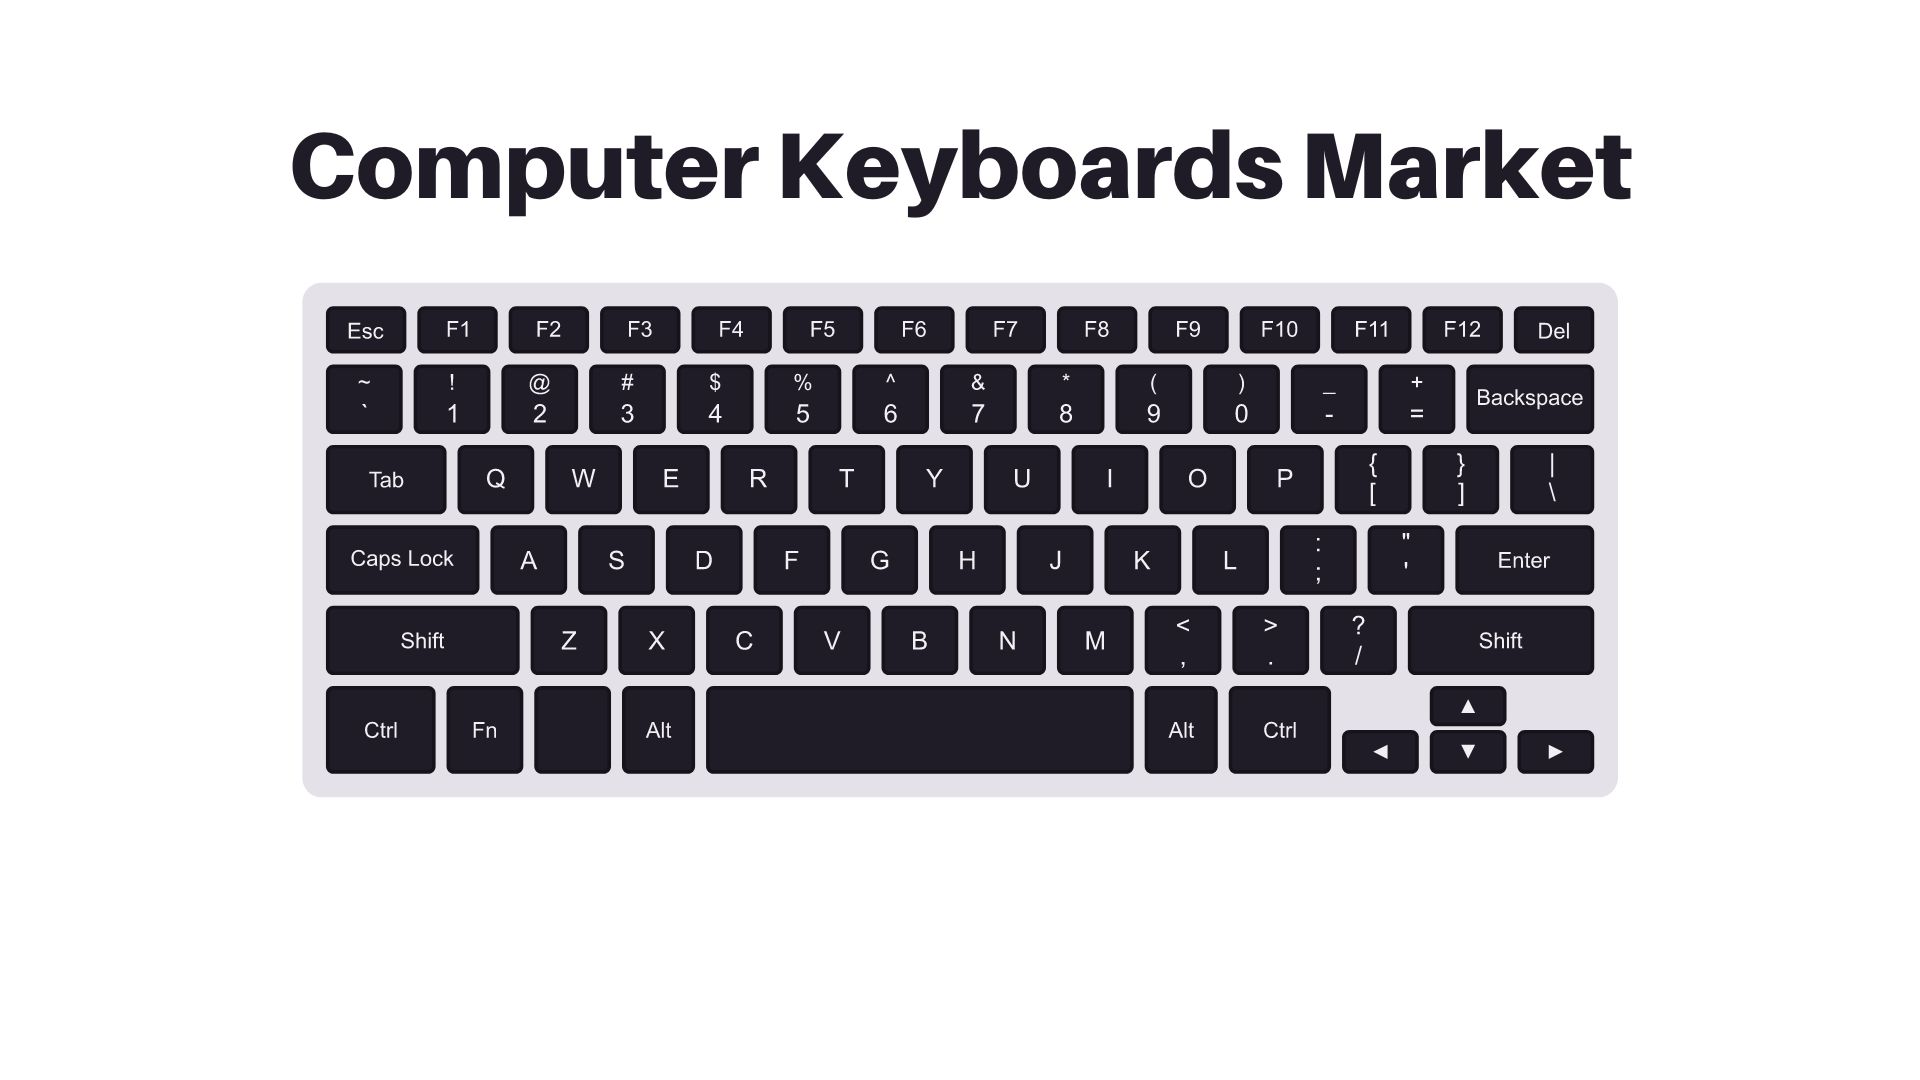 Global Computer Keyboards Market is expected to grow at a significant CAGR of 3.3%